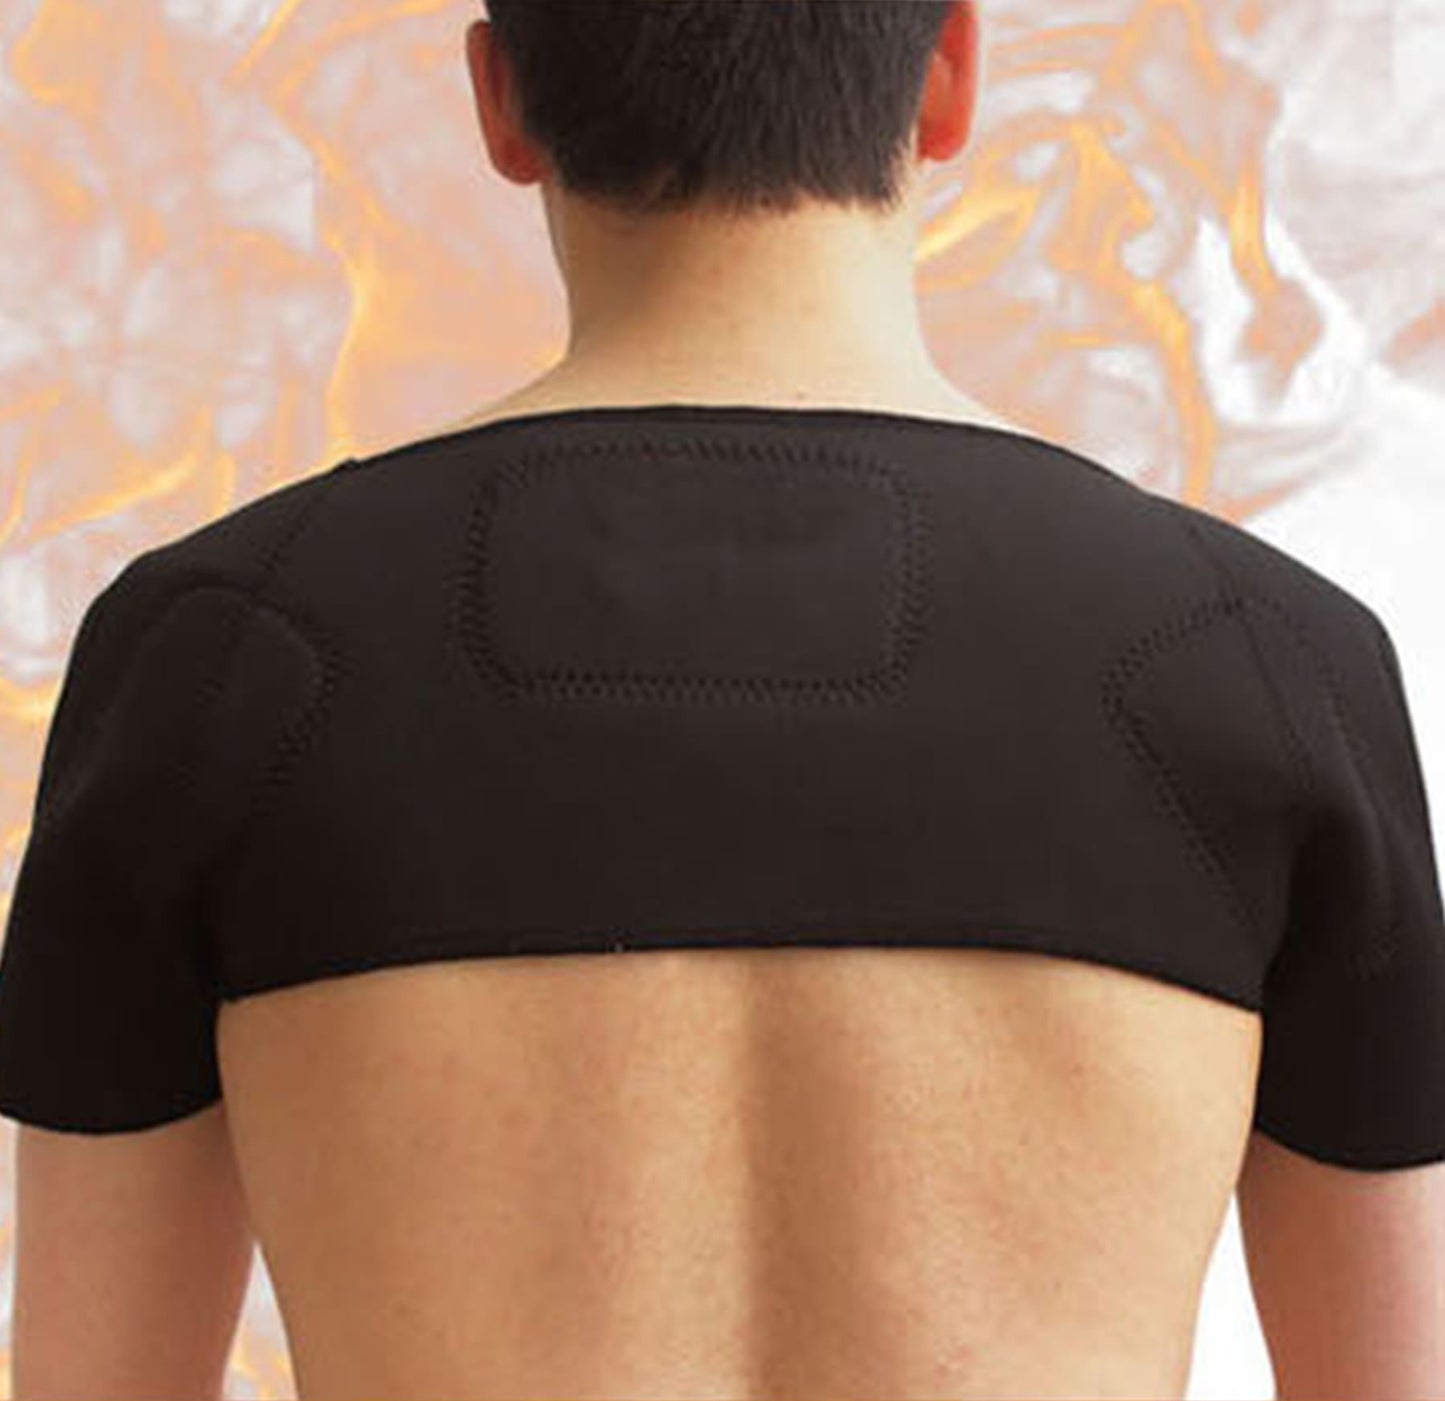 Shoulder Brace, with Self-heating and Magnets for Shoulder Pain Relief